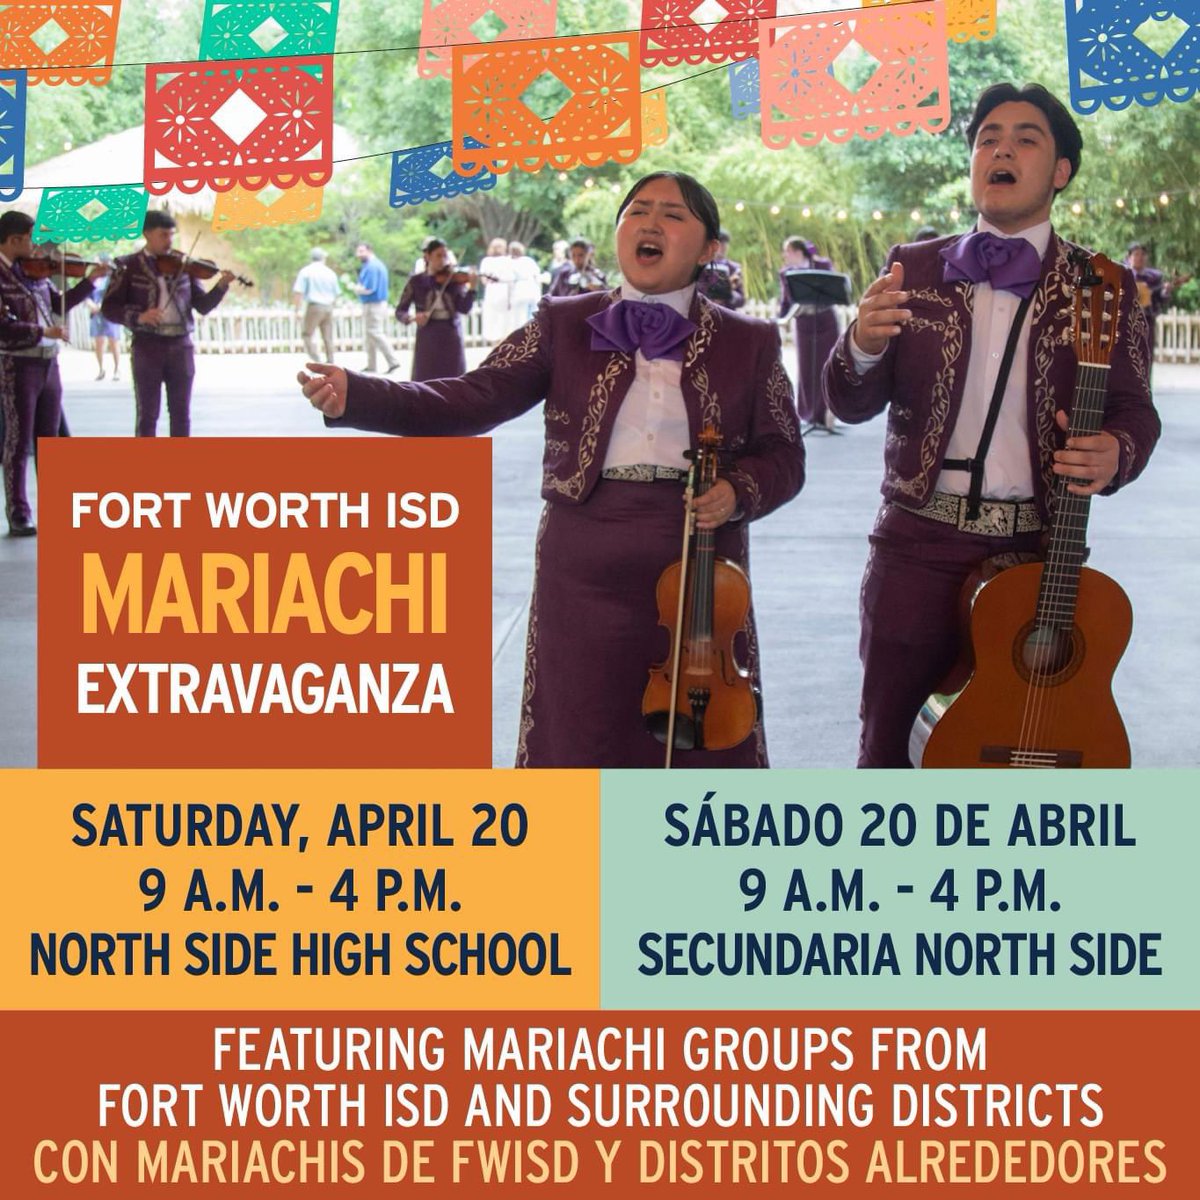 @FortWorthISD Mariachi Extravaganza is Saturday, April 20 from 9 a.m. to 4 p.m. at the @NorthSideFWISD Auditorium! Come enjoy performances from talented middle and high school mariachi groups from FWISD and across the DFW metroplex! The event is free and open to the public.